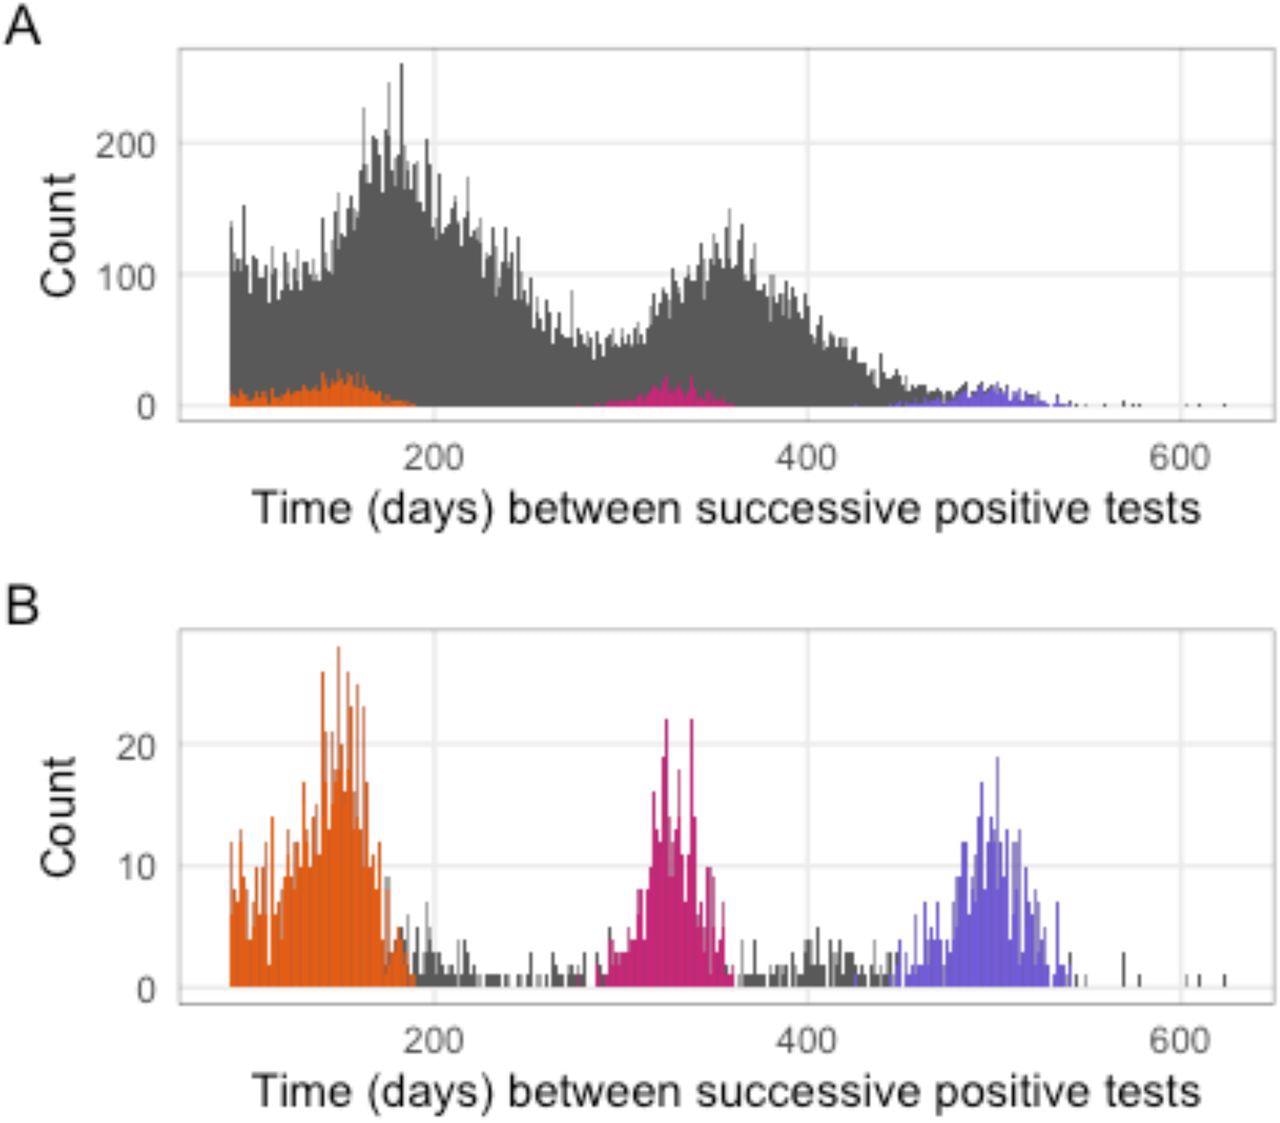 Time between detection of first and second infections. A: Time in days between infections for individuals with suspected reinfection. Note that the time since the previous positive test must be at least 90 days. Colors represent suspected reinfections diagnosed since 1 November 2021. B: Time in days between infections for individuals with suspected reinfections diagnosed since 1 November 2021. Bars for these individuals are colored by the wave during which the primary infection occurred in both panels (purple = wave 1, pink = wave 2, orange = wave 3).